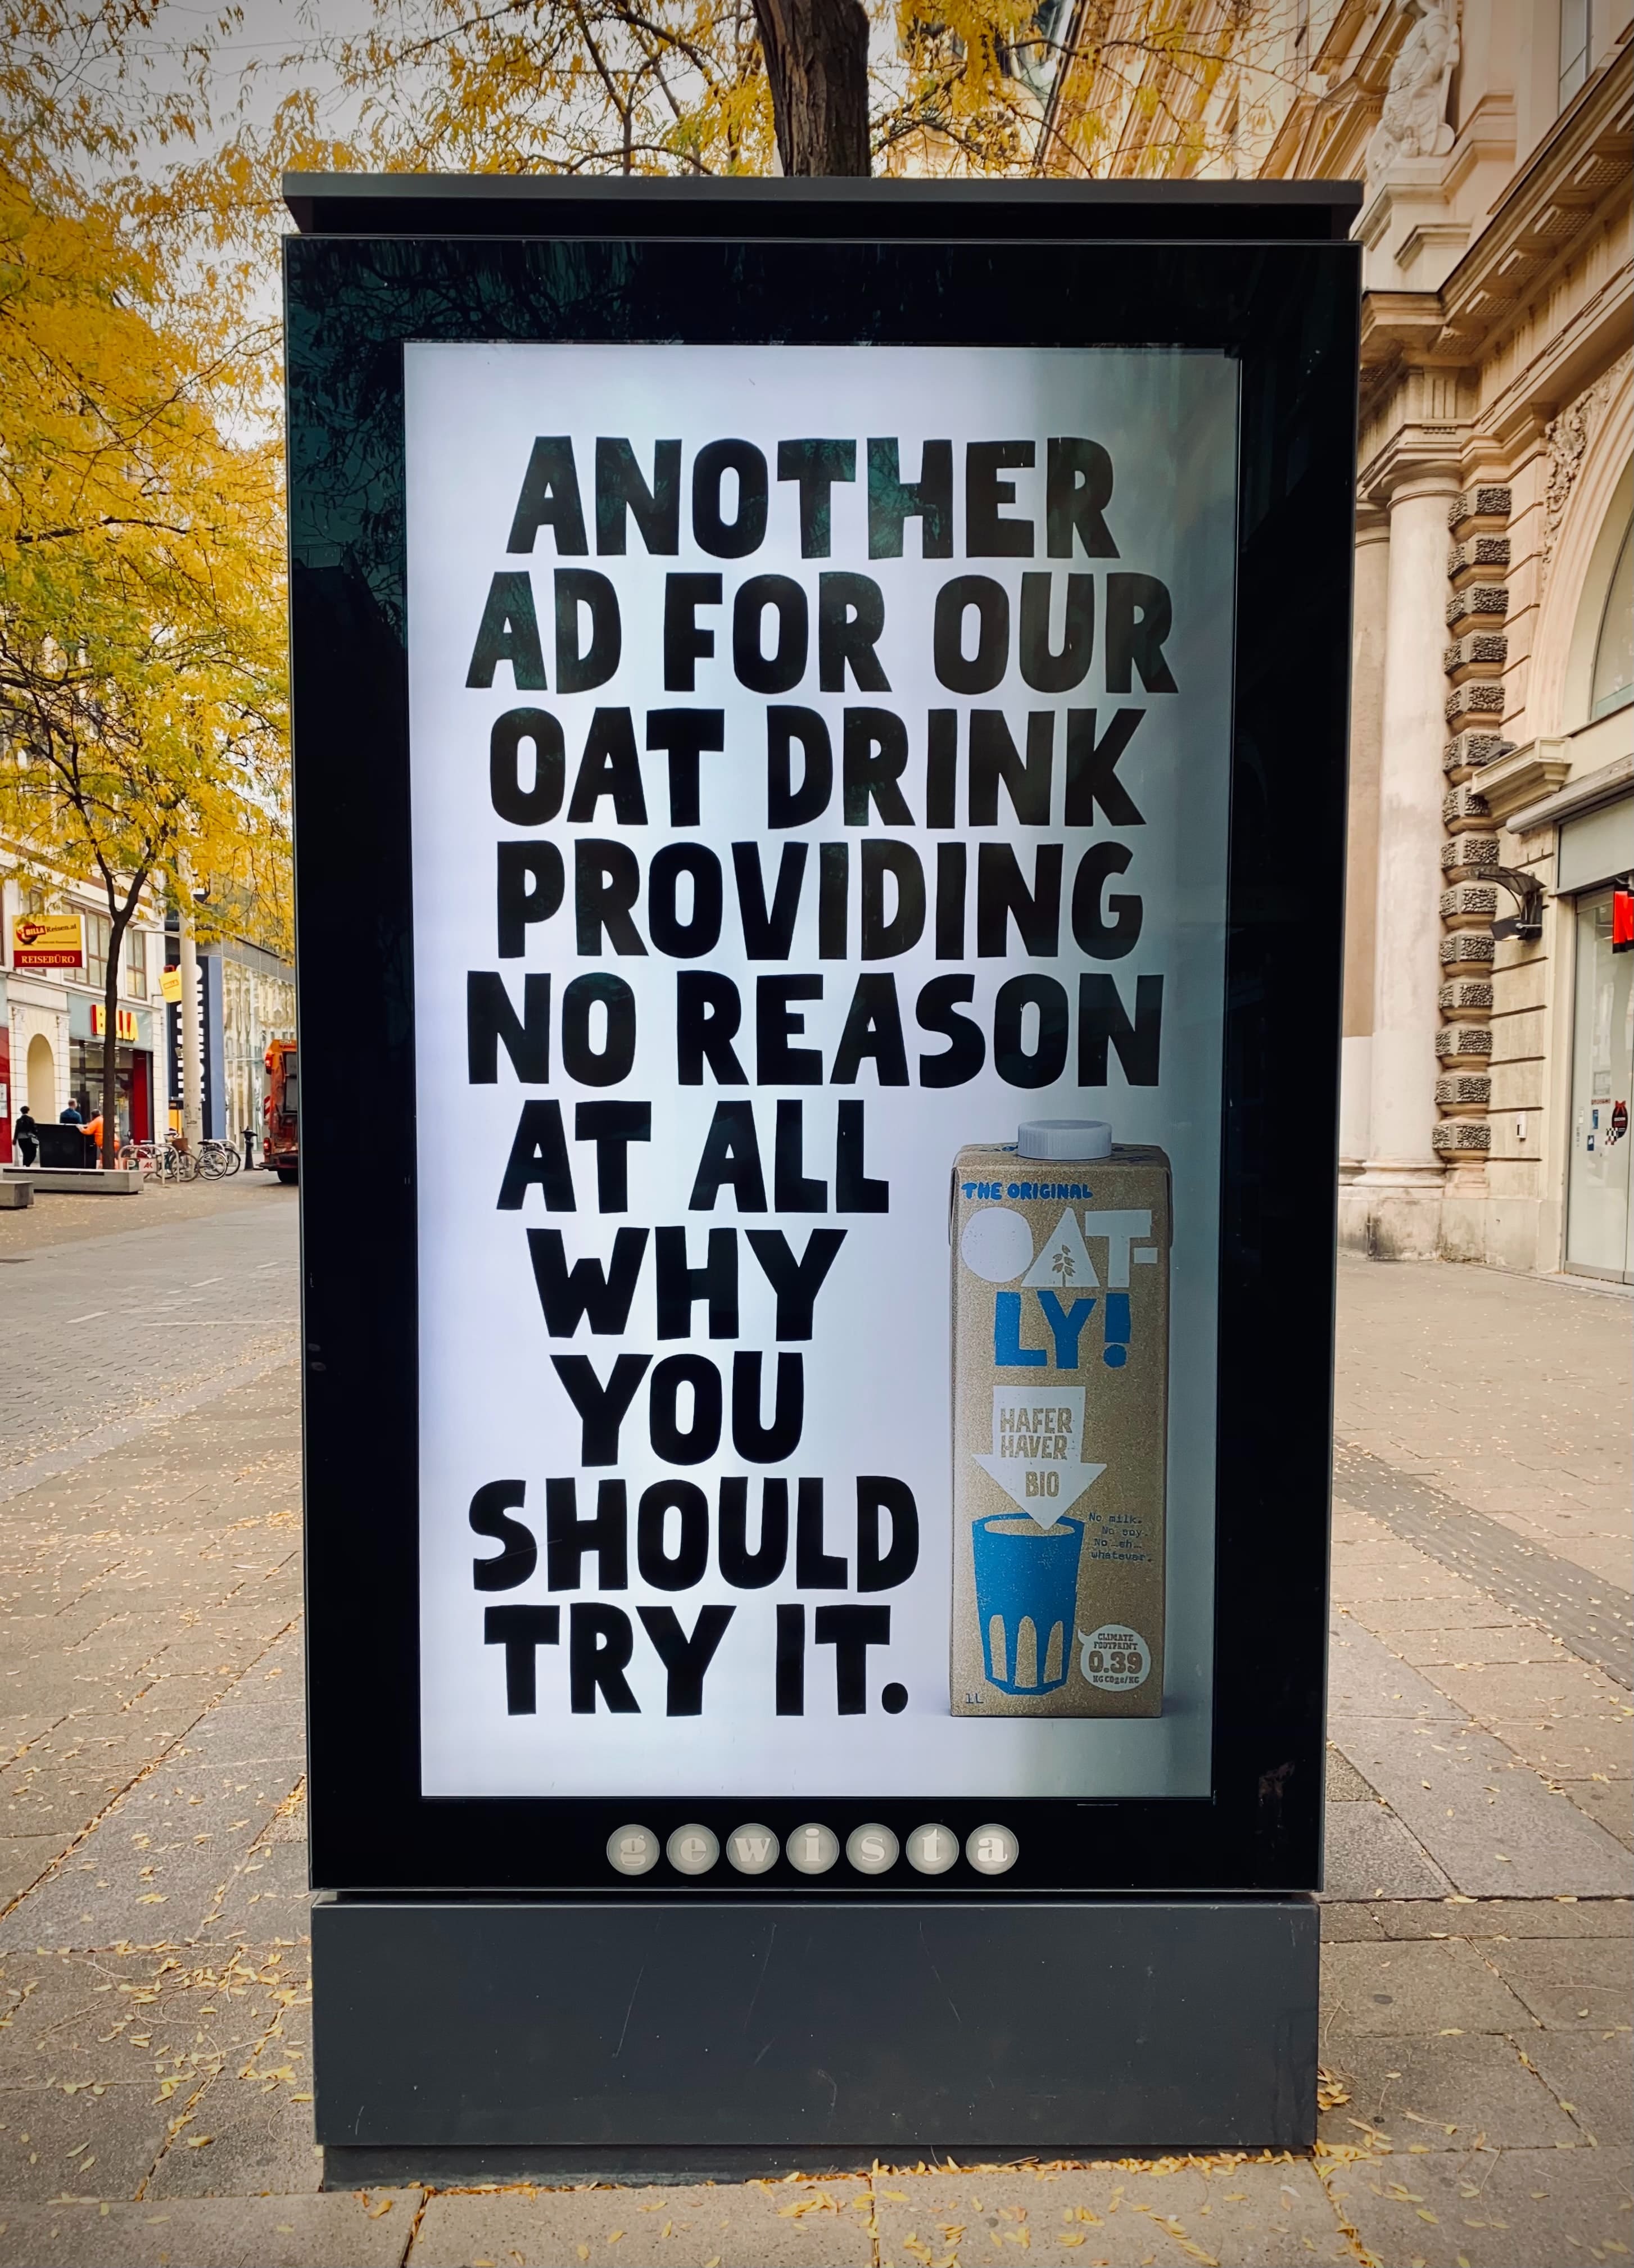 An advert for oat milk on a n 